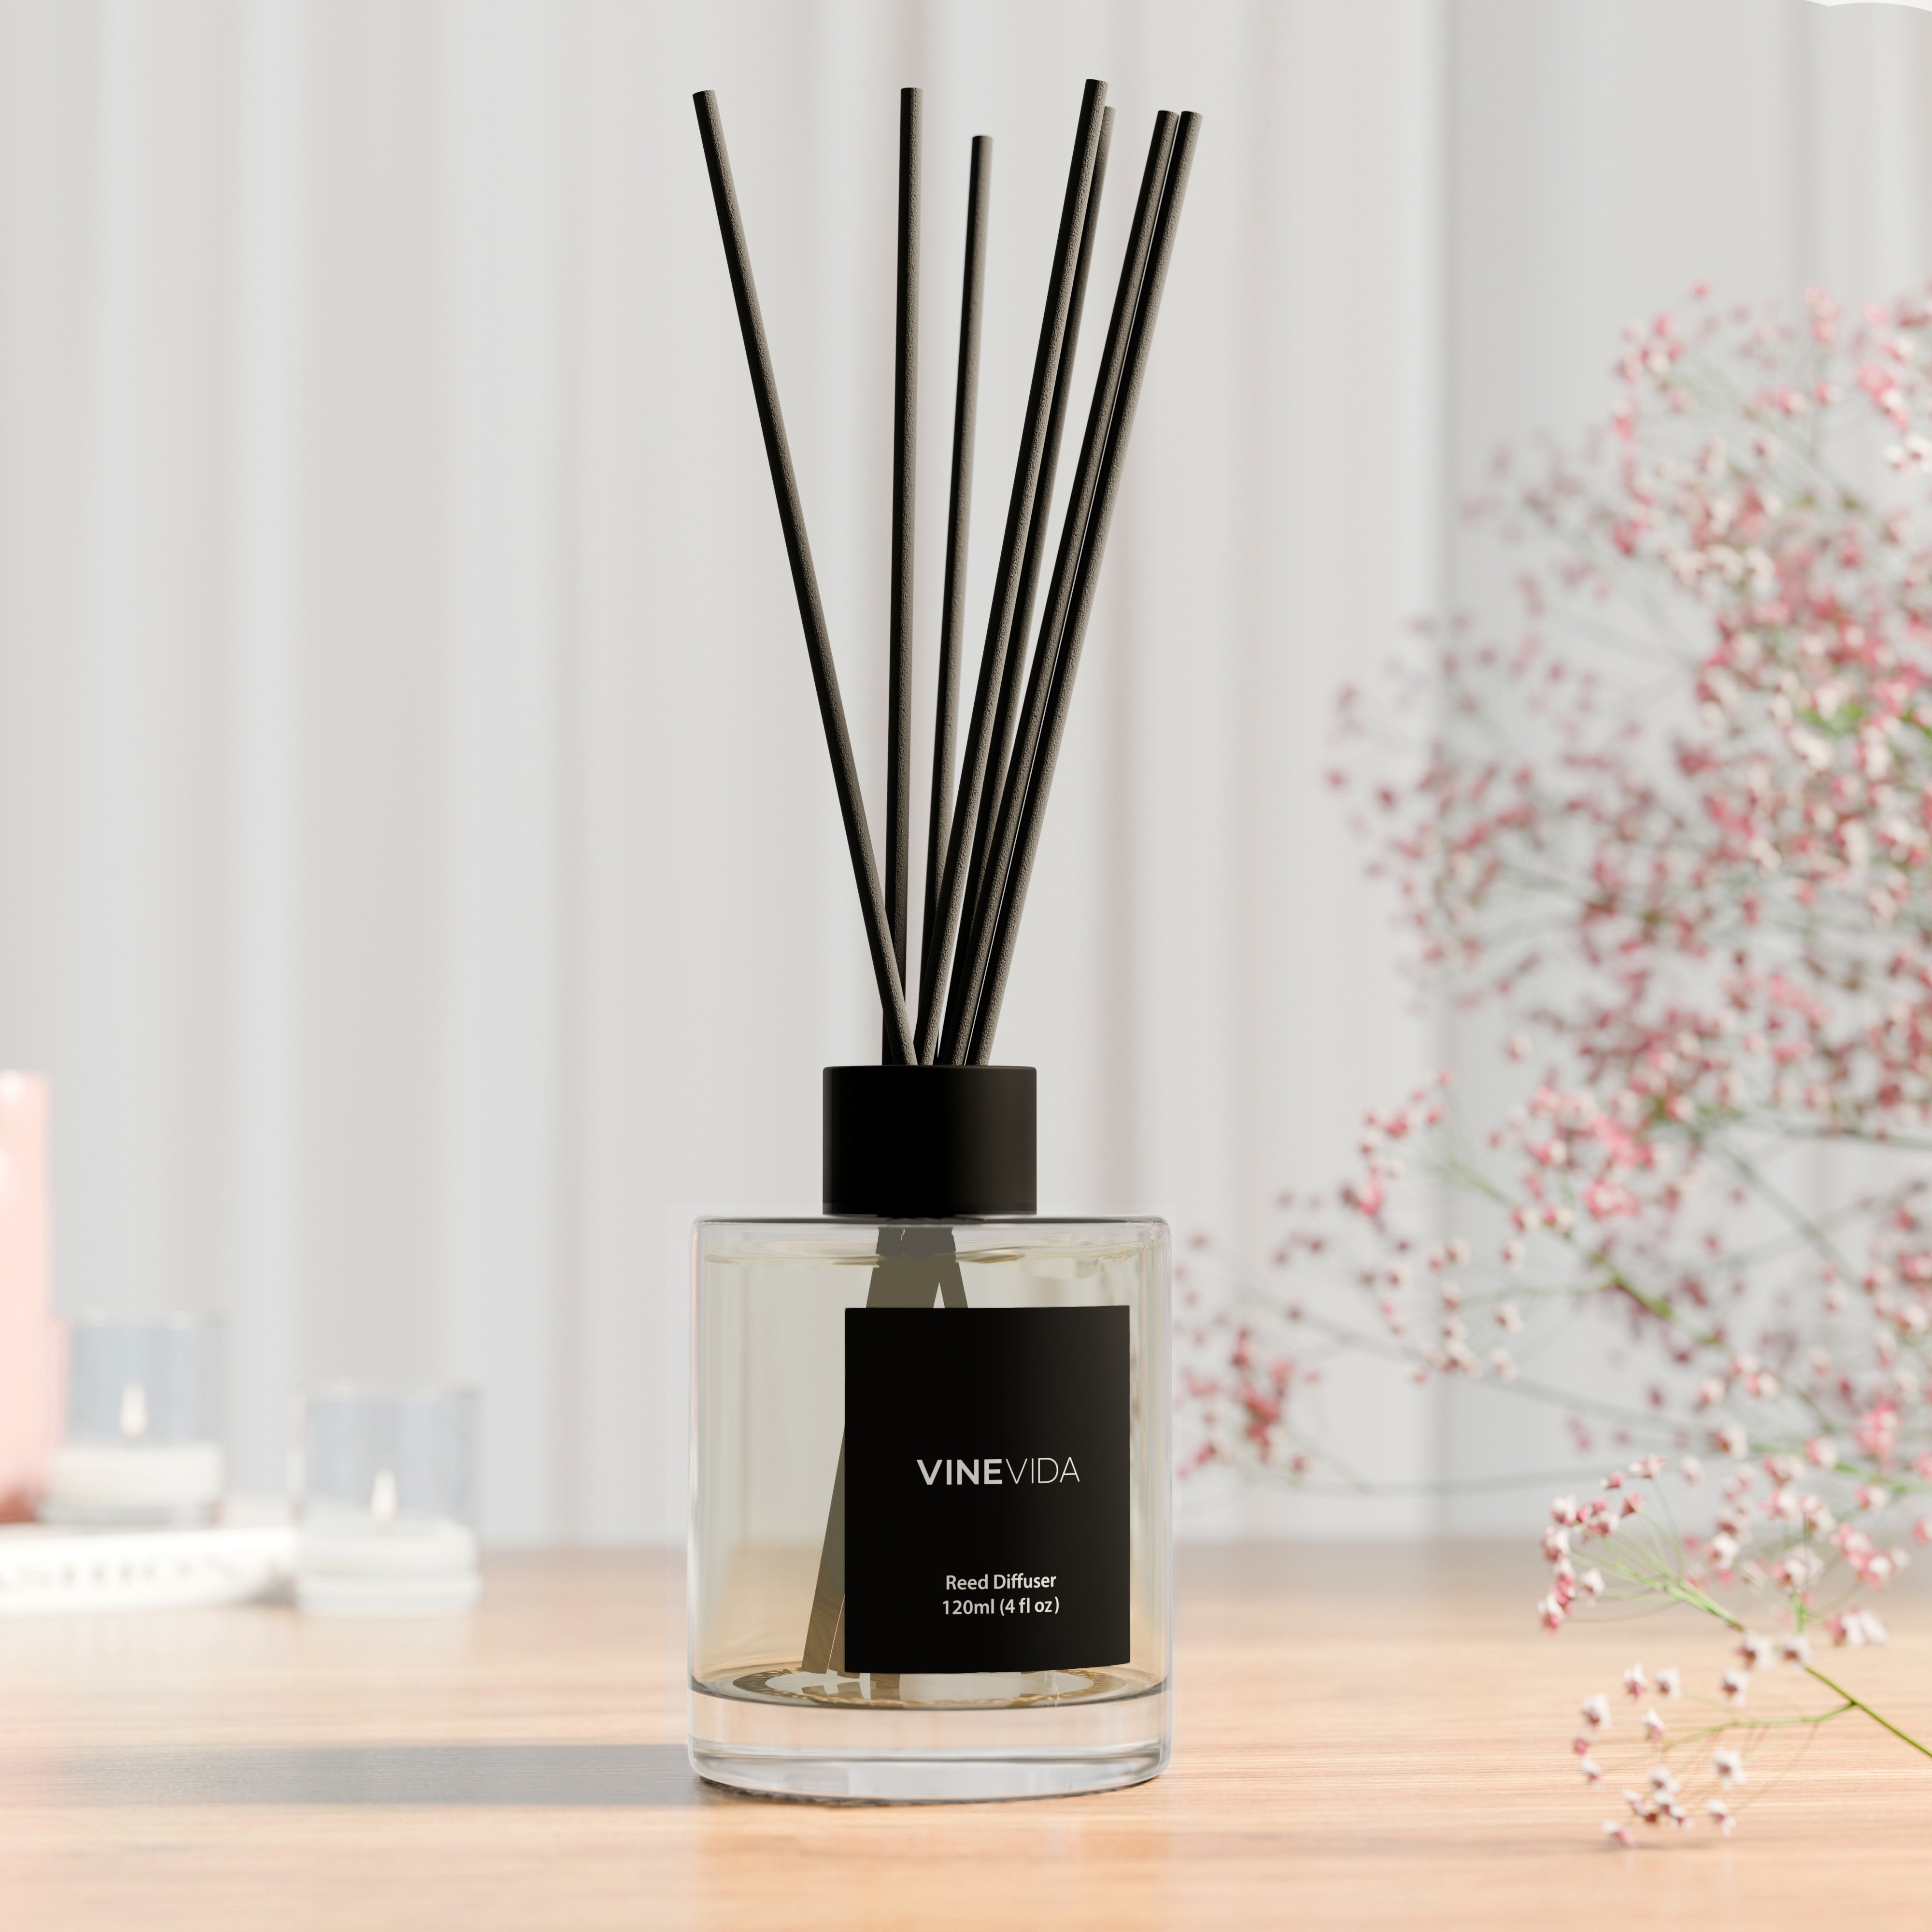 NO. 1109 Reed Diffuser - Inspired by: Cucumber Melon by Bath & Body Works